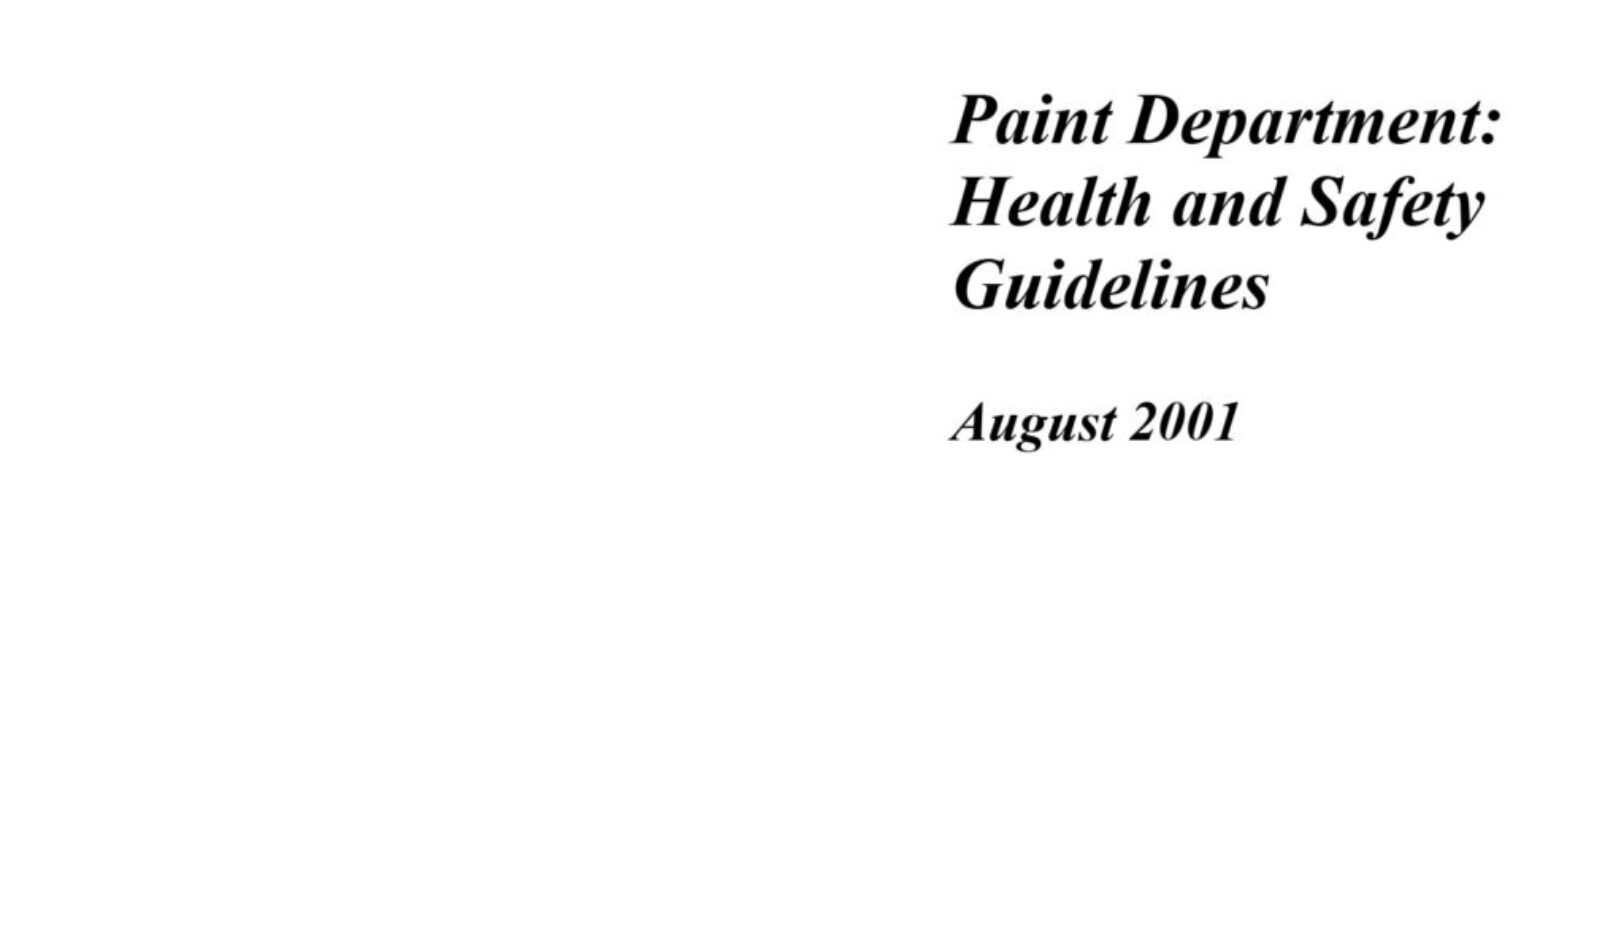 Paint Department Health and Safety Report